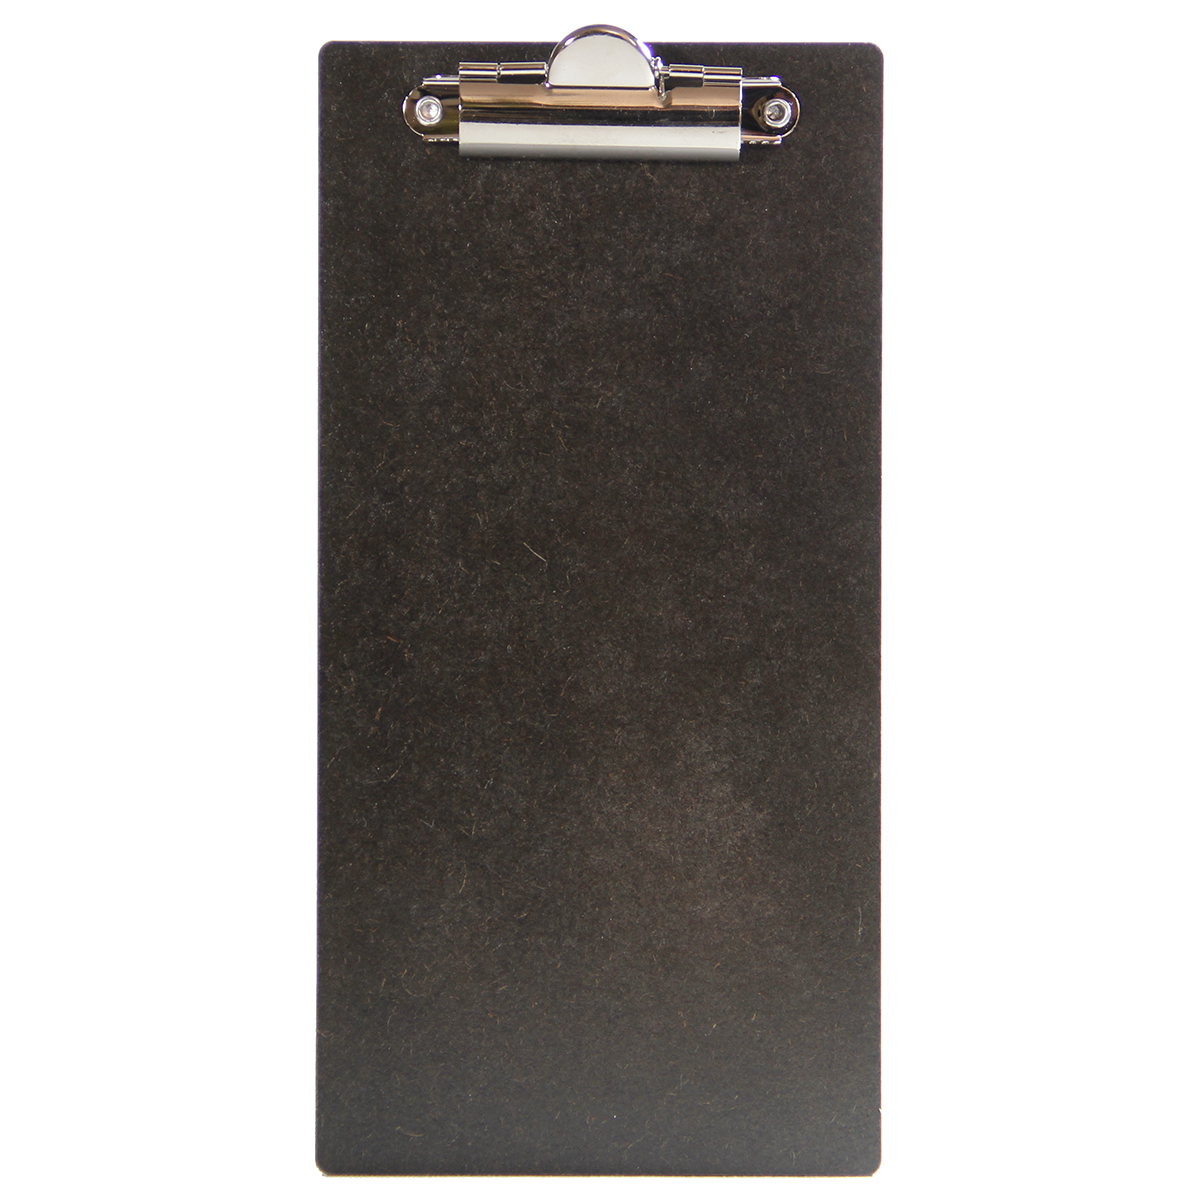 Stained Hardboard Check Presenter Clipboard.